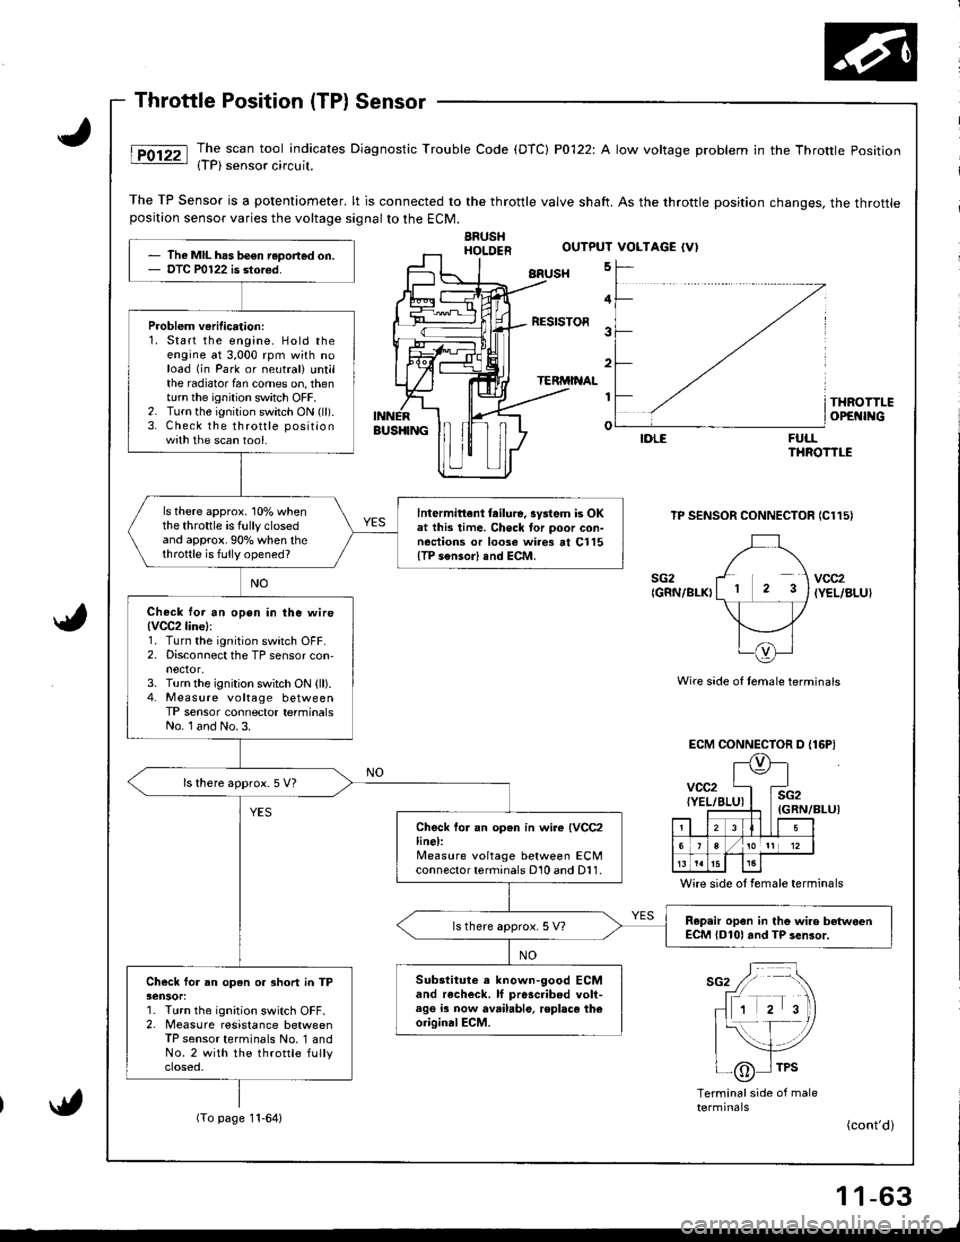 ACURA INTEGRA 1998  Service Repair Manual The scan tool indicates Diagnostic Trouble Code (DTC) P0122: A low voltage problem in the Throttle Position{TP) sensor circuil.
The TP Sensor is a potentiometer. lt is connected to the throttle valve 